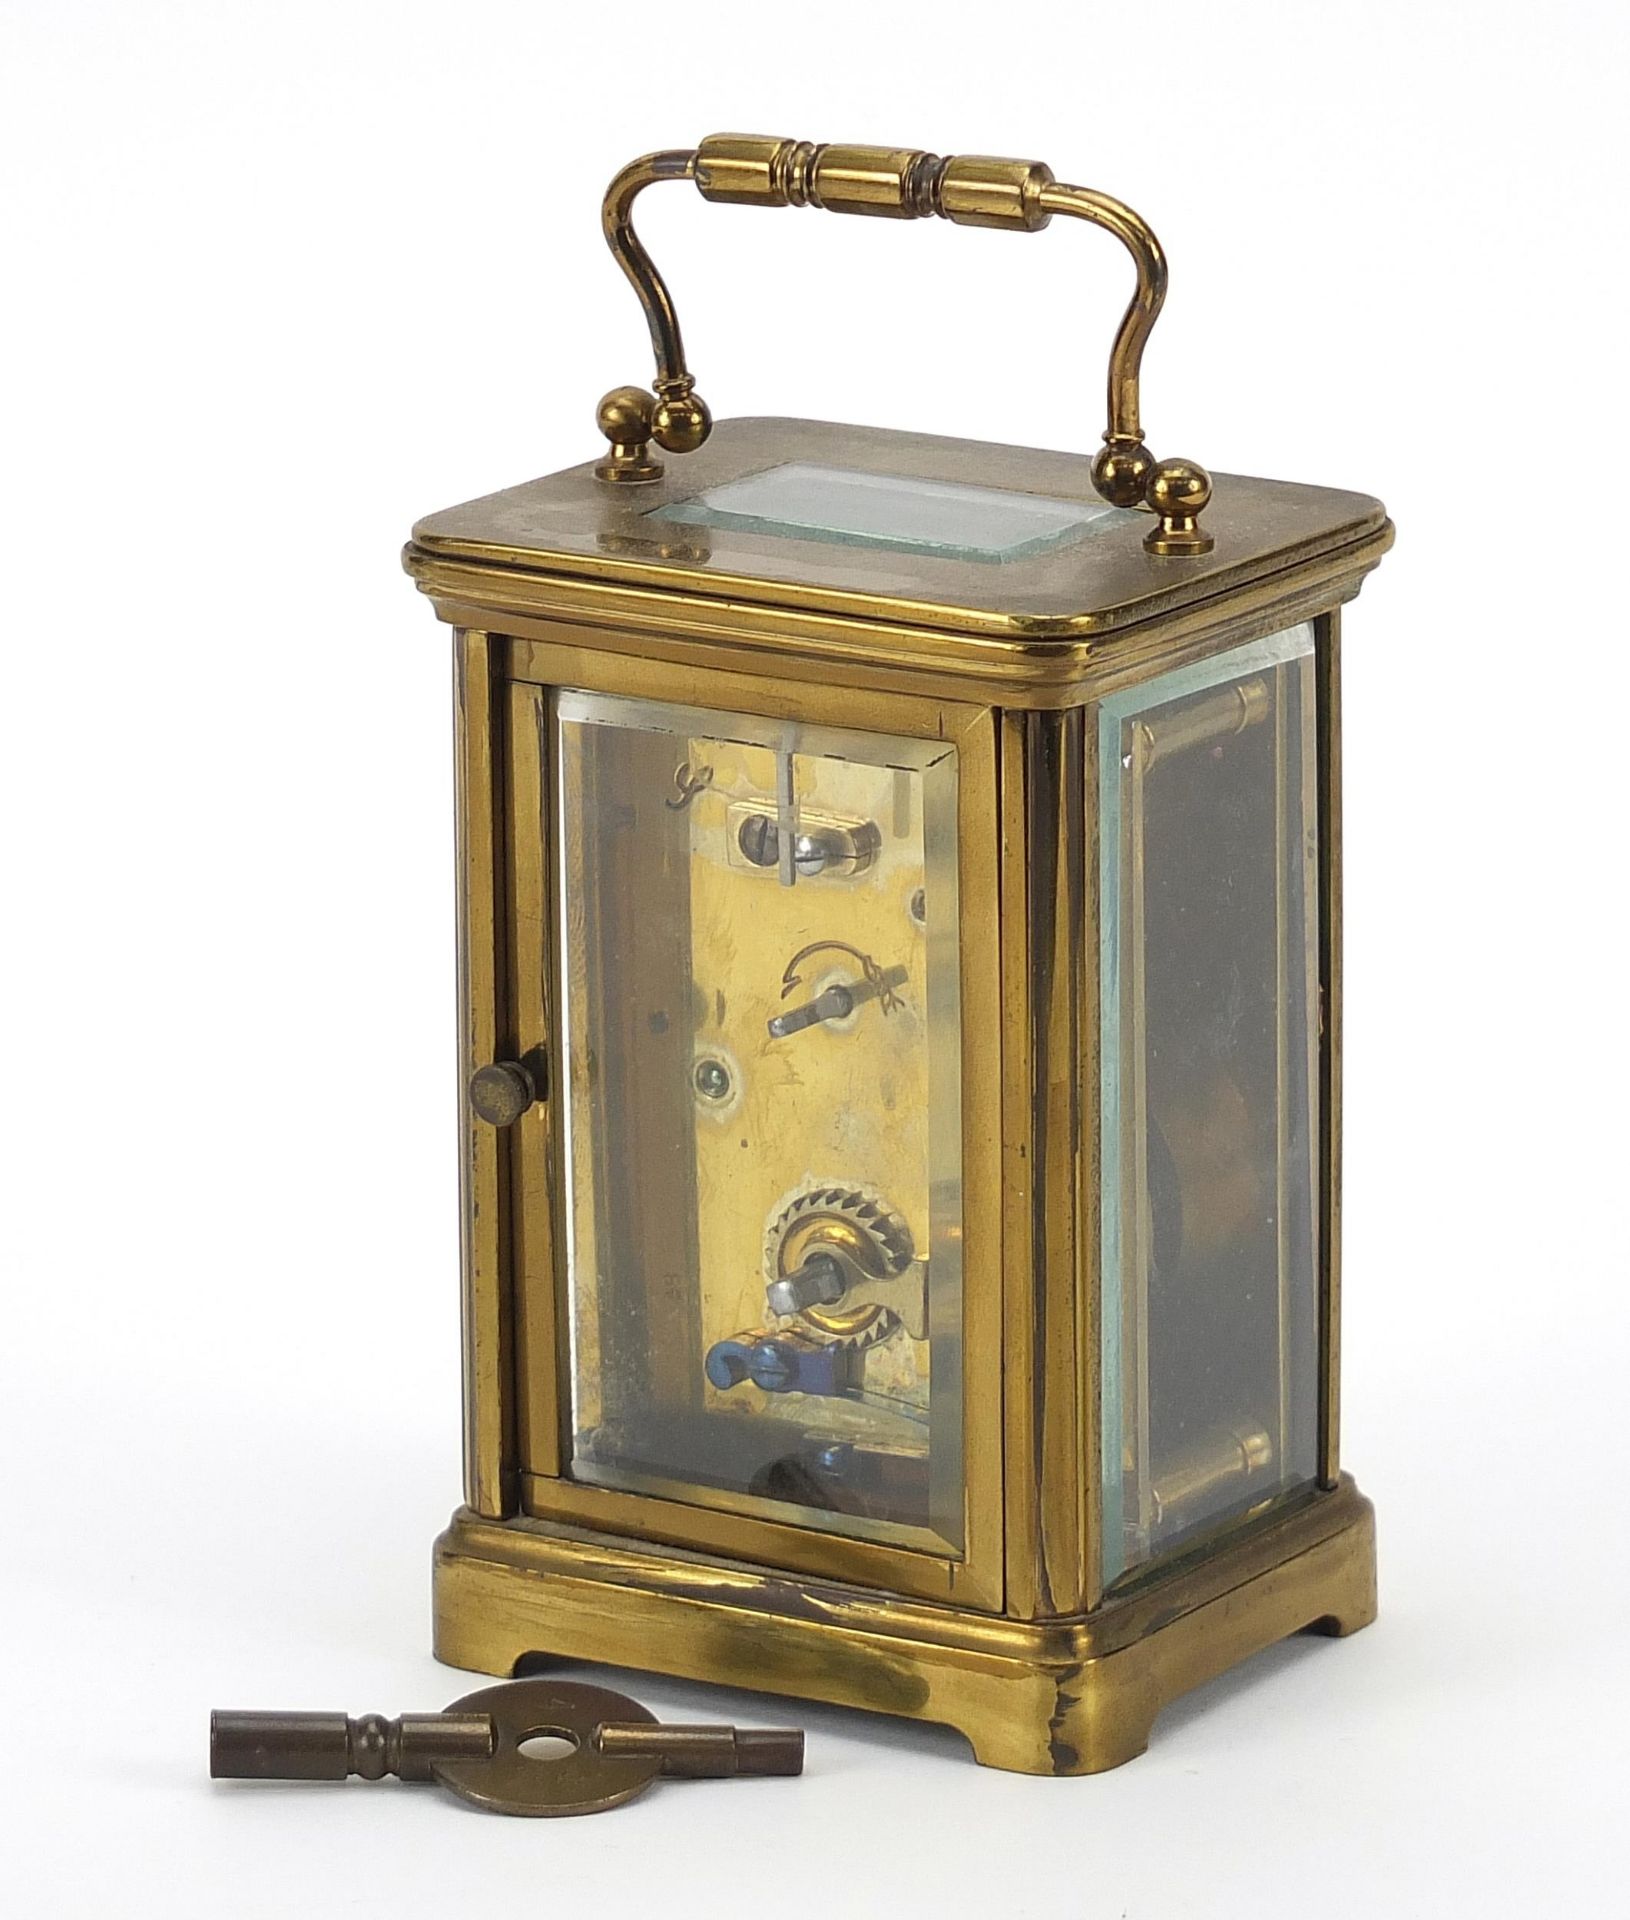 Brass cased carriage clock with enamelled dial and Roman numerals, 11cm high - Image 2 of 3